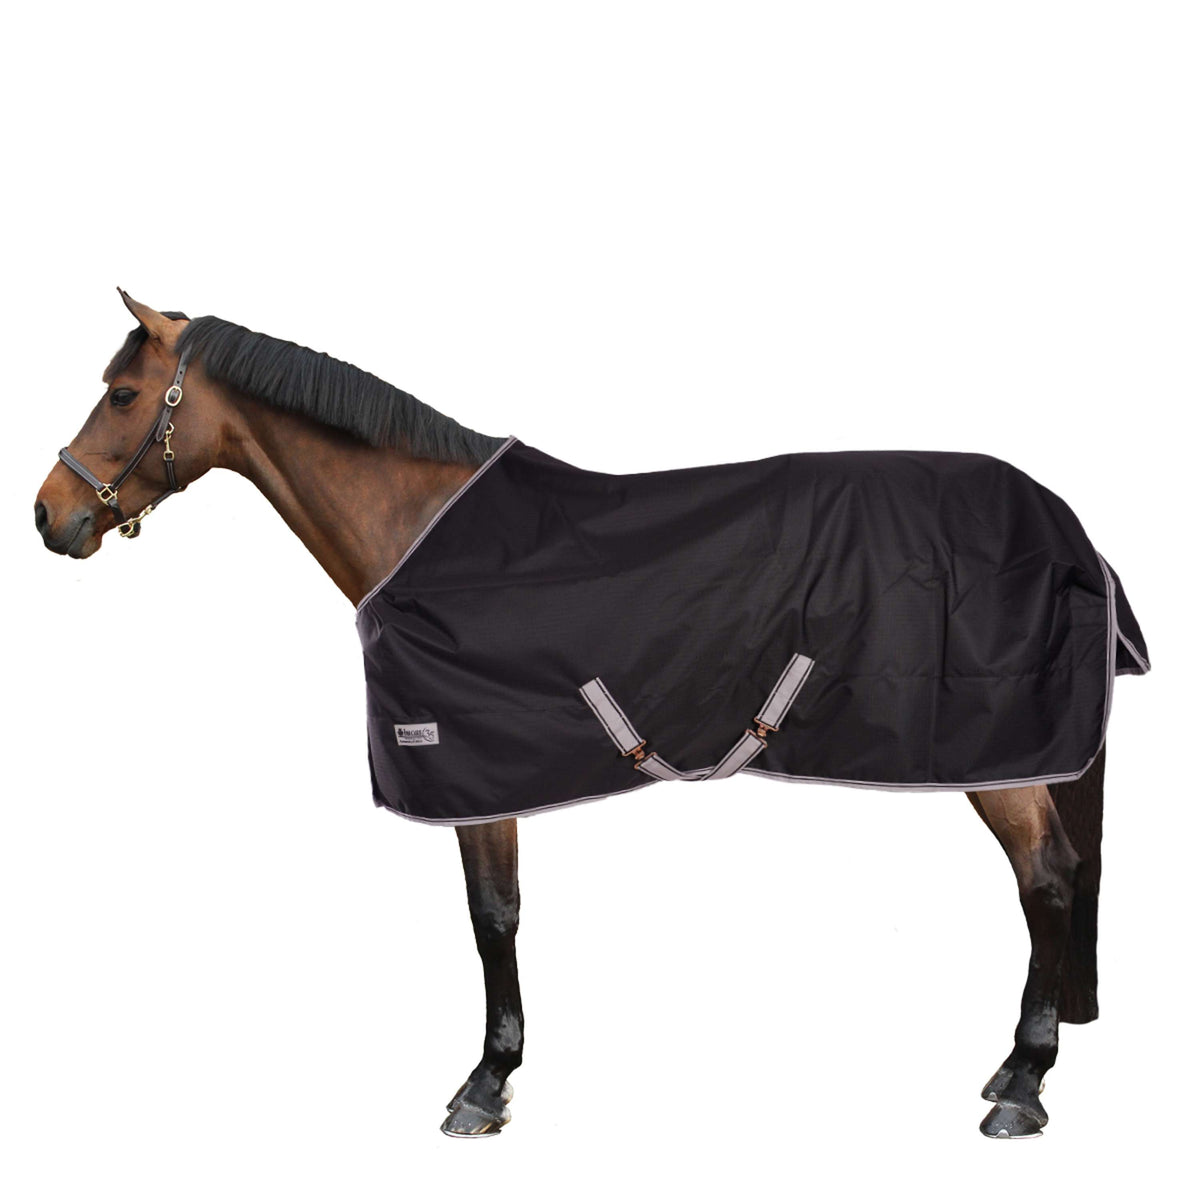 Bucas Anniversary Turnout 150g Stay-Dry Black/Silver